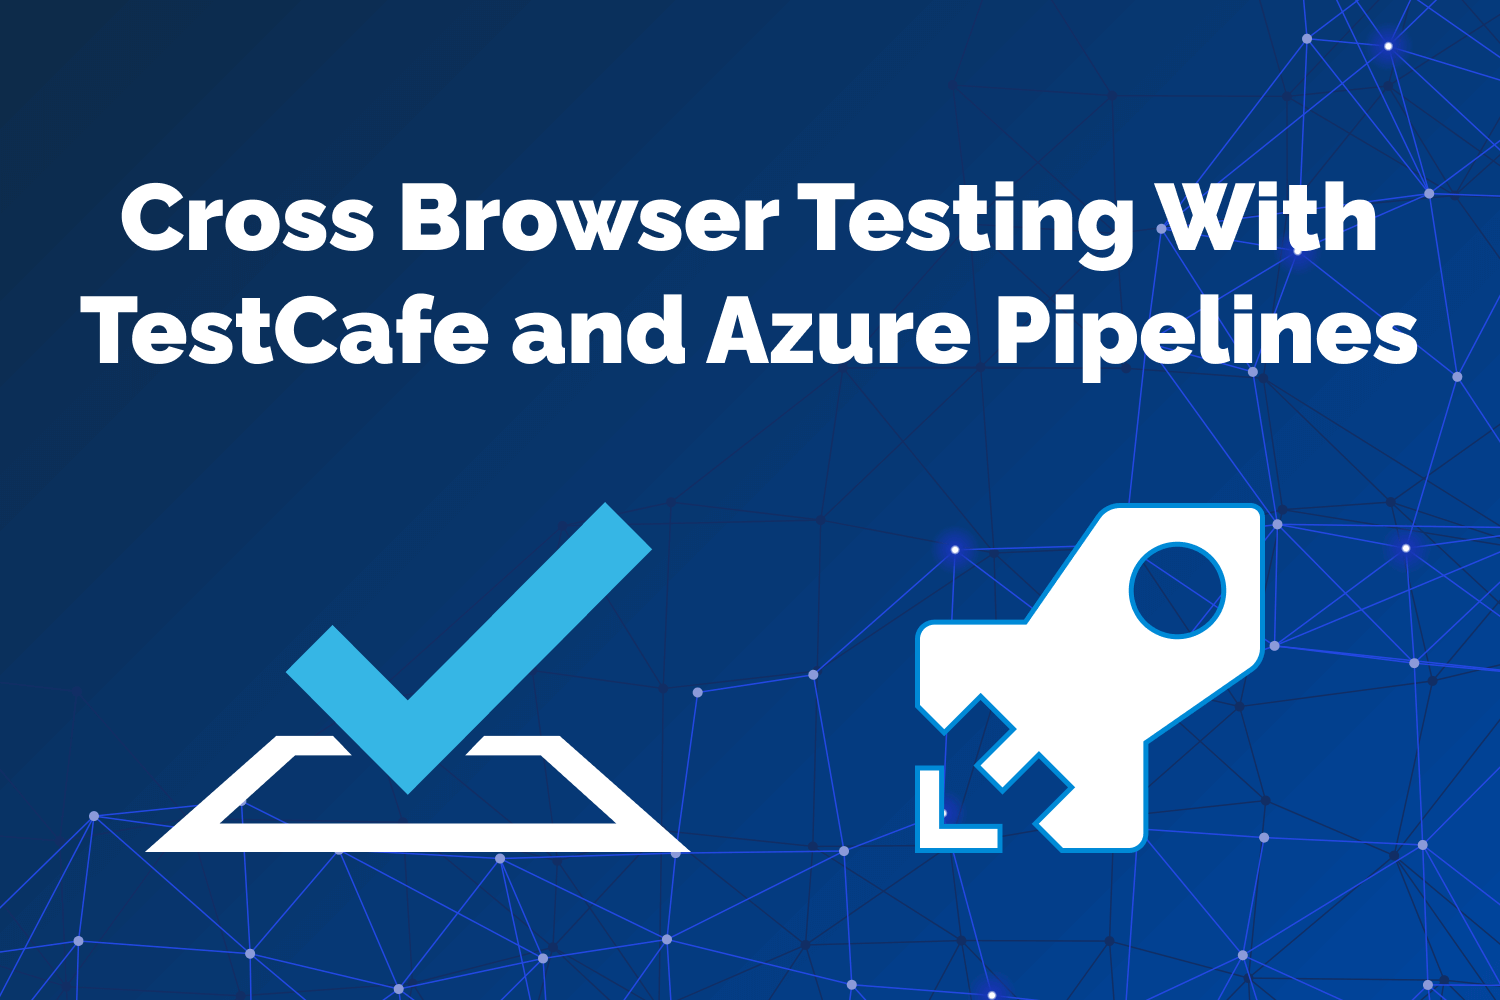 Cross Browser Testing With TestCafe and Azure Pipelines